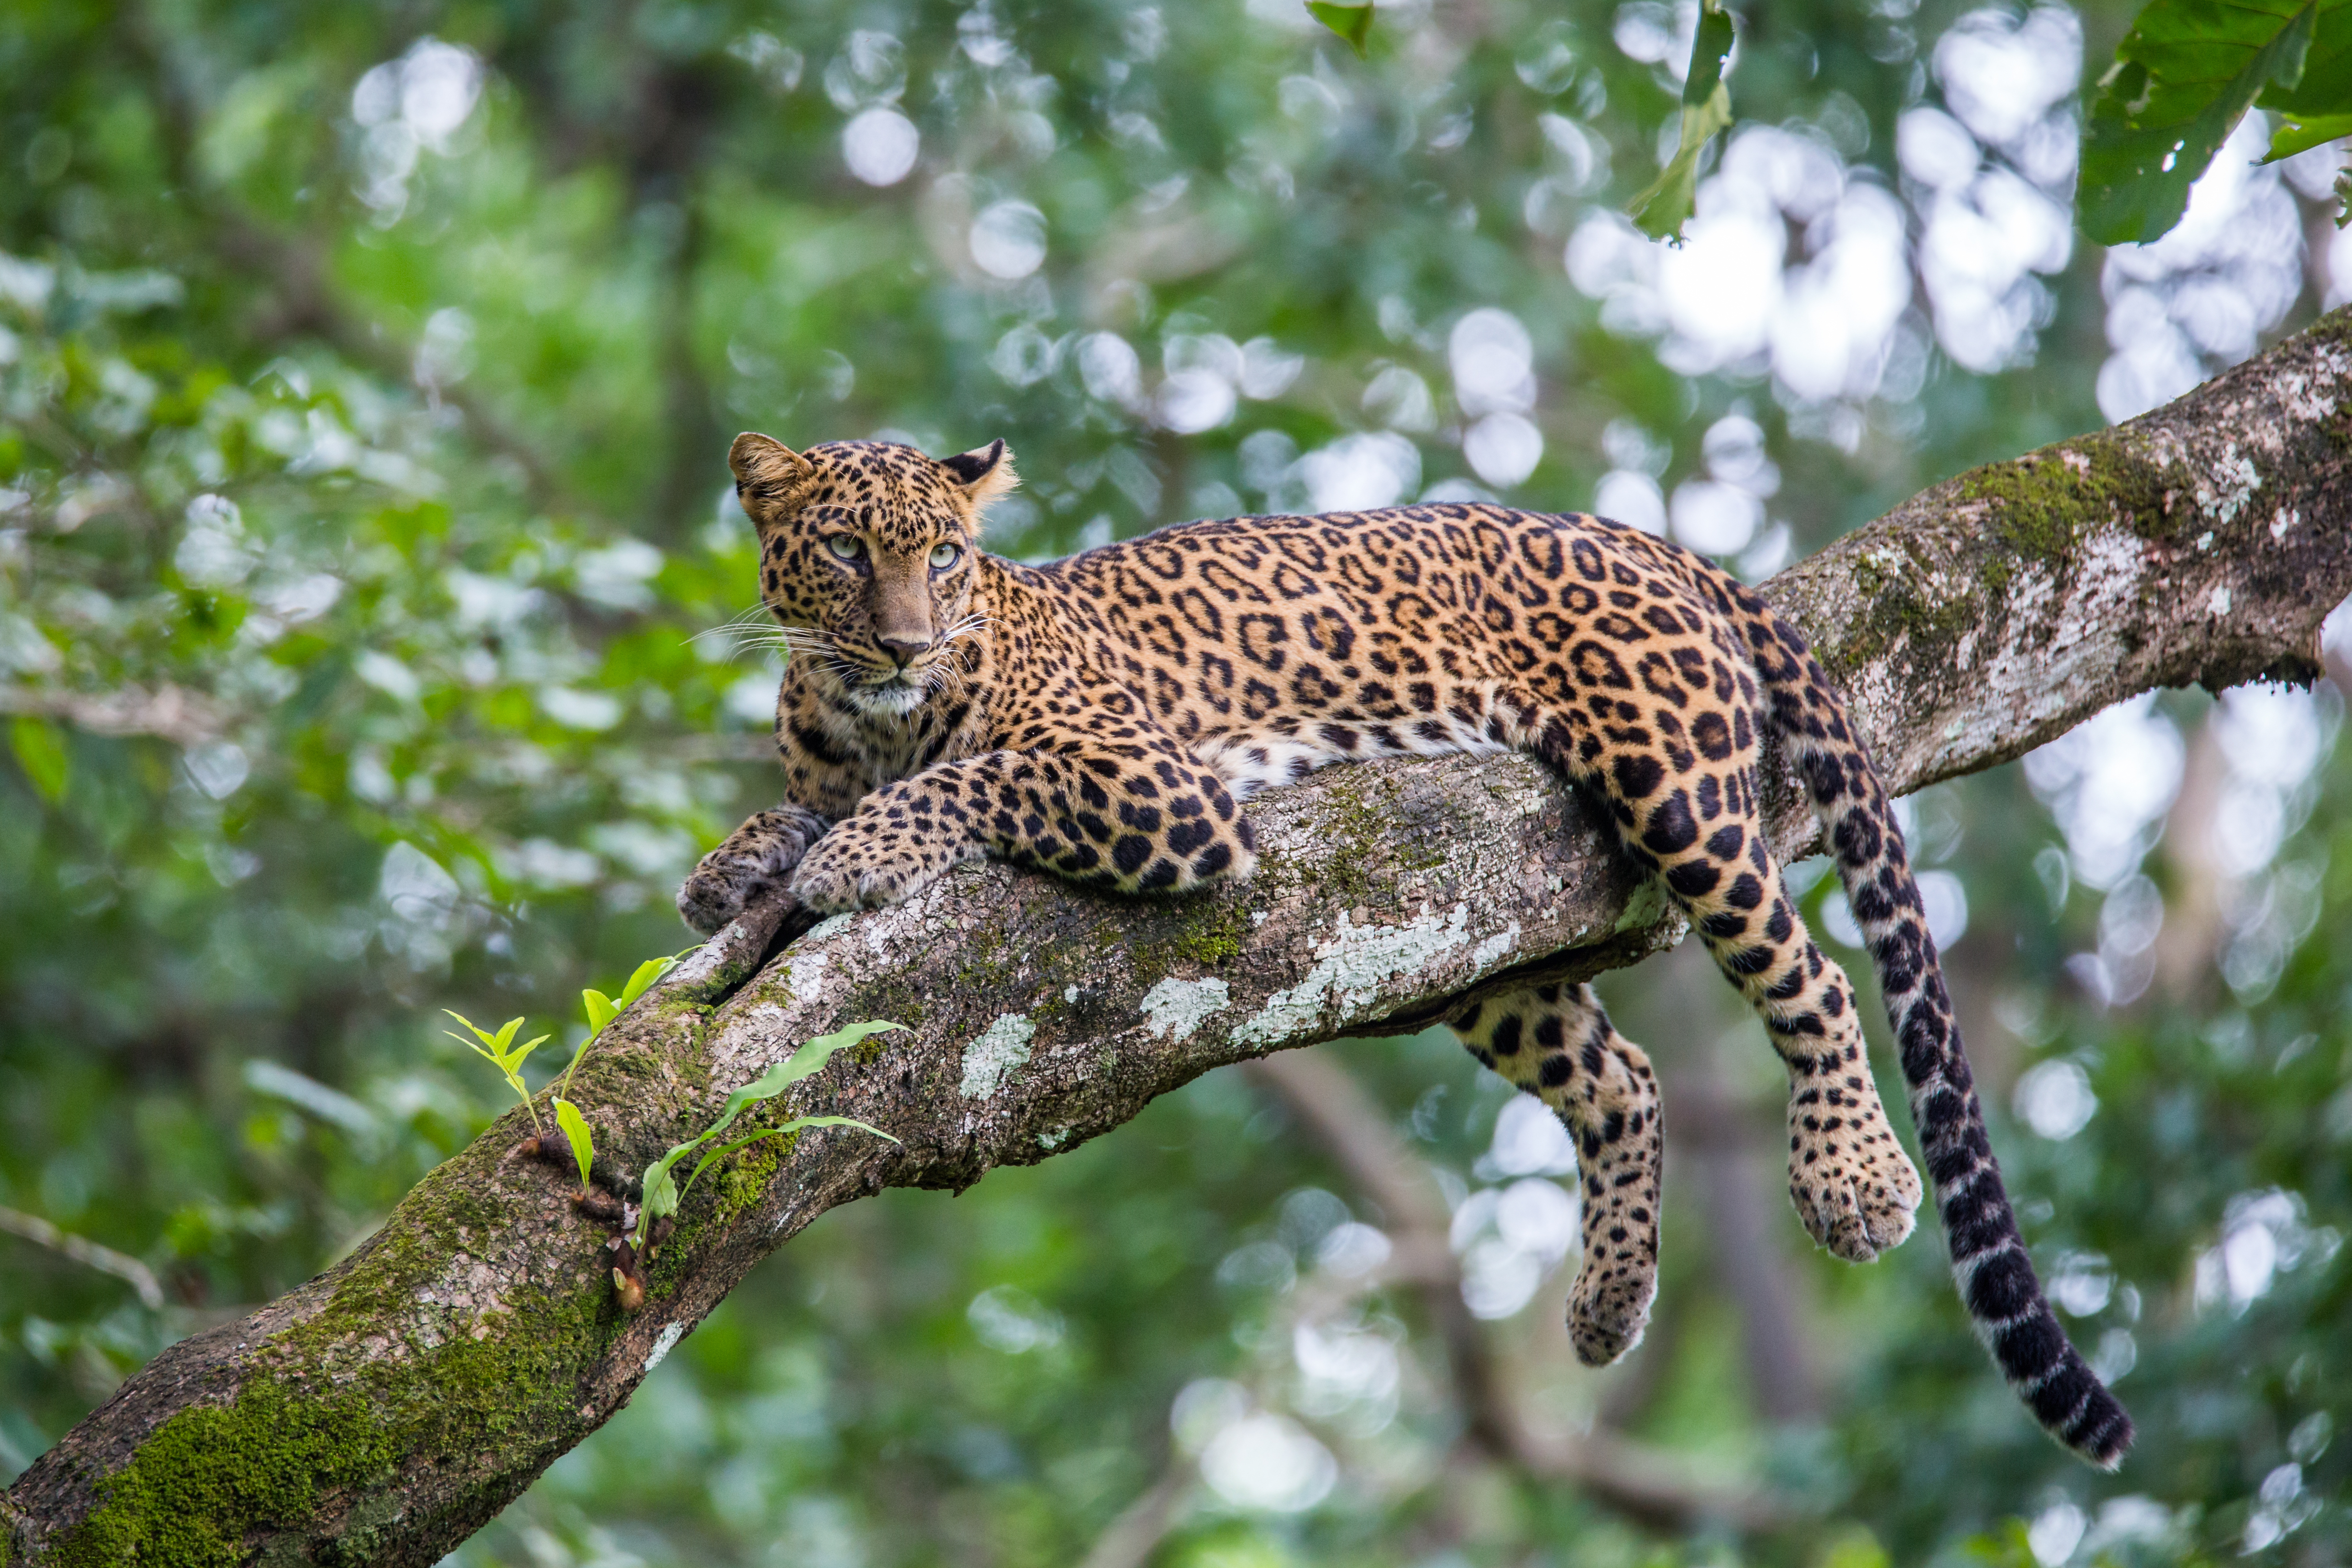 Factors like loss of habitat, a shrinking prey base, man-animal conflict, and organised poaching and poisoning of the animal are leading to the decimation of the leopard population